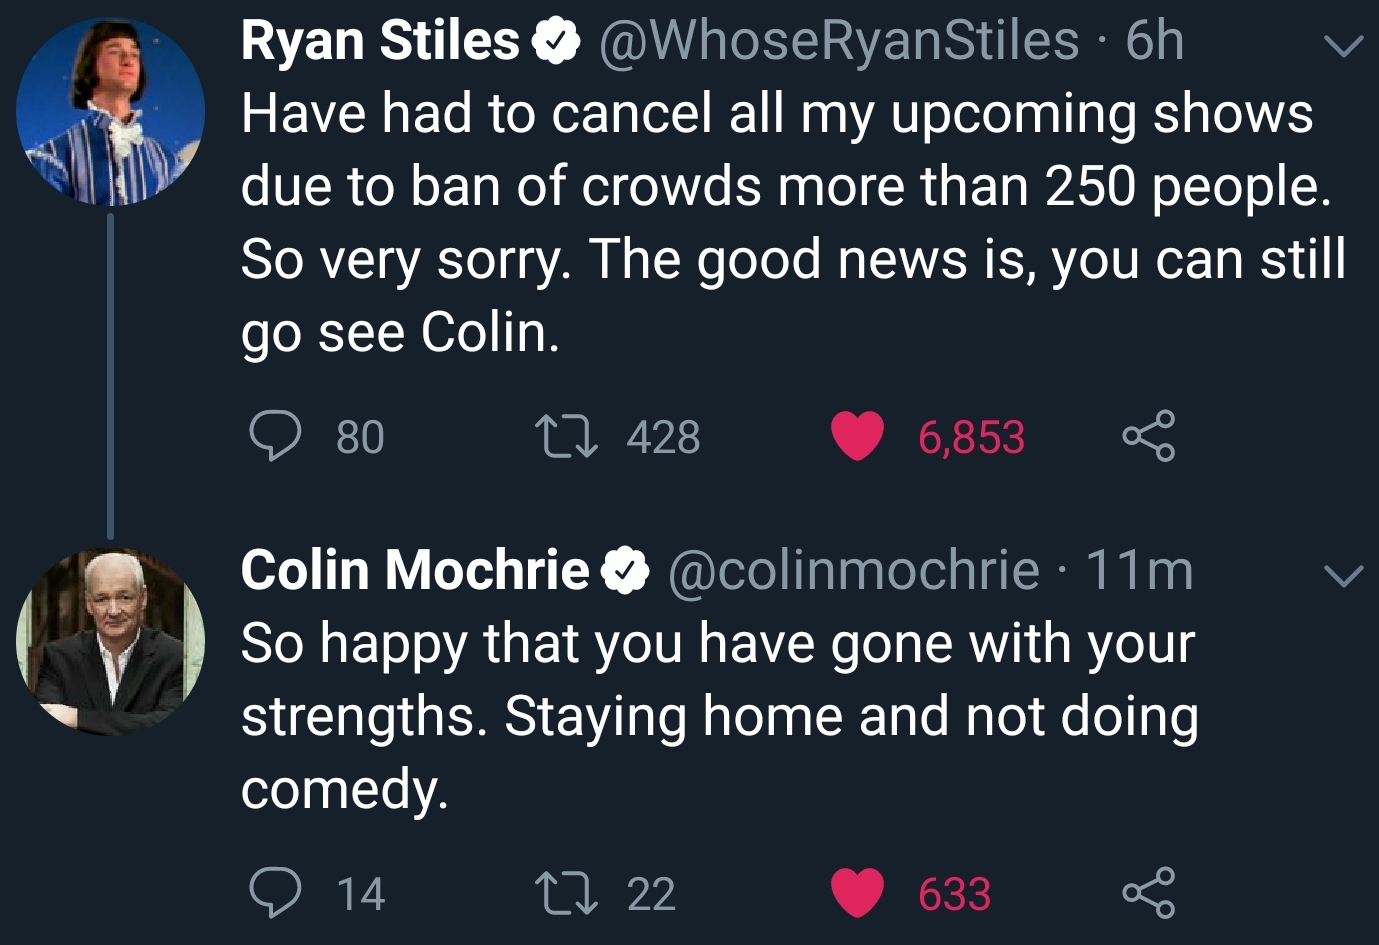 presentation - Ryan Stiles 6h Have had to cancel all my upcoming shows due to ban of crowds more than 250 people. So very sorry. The good news is, you can still go see Colin. 9 80 22 428 6,853 % Colin Mochrie 11m So happy that you have gone with your stre